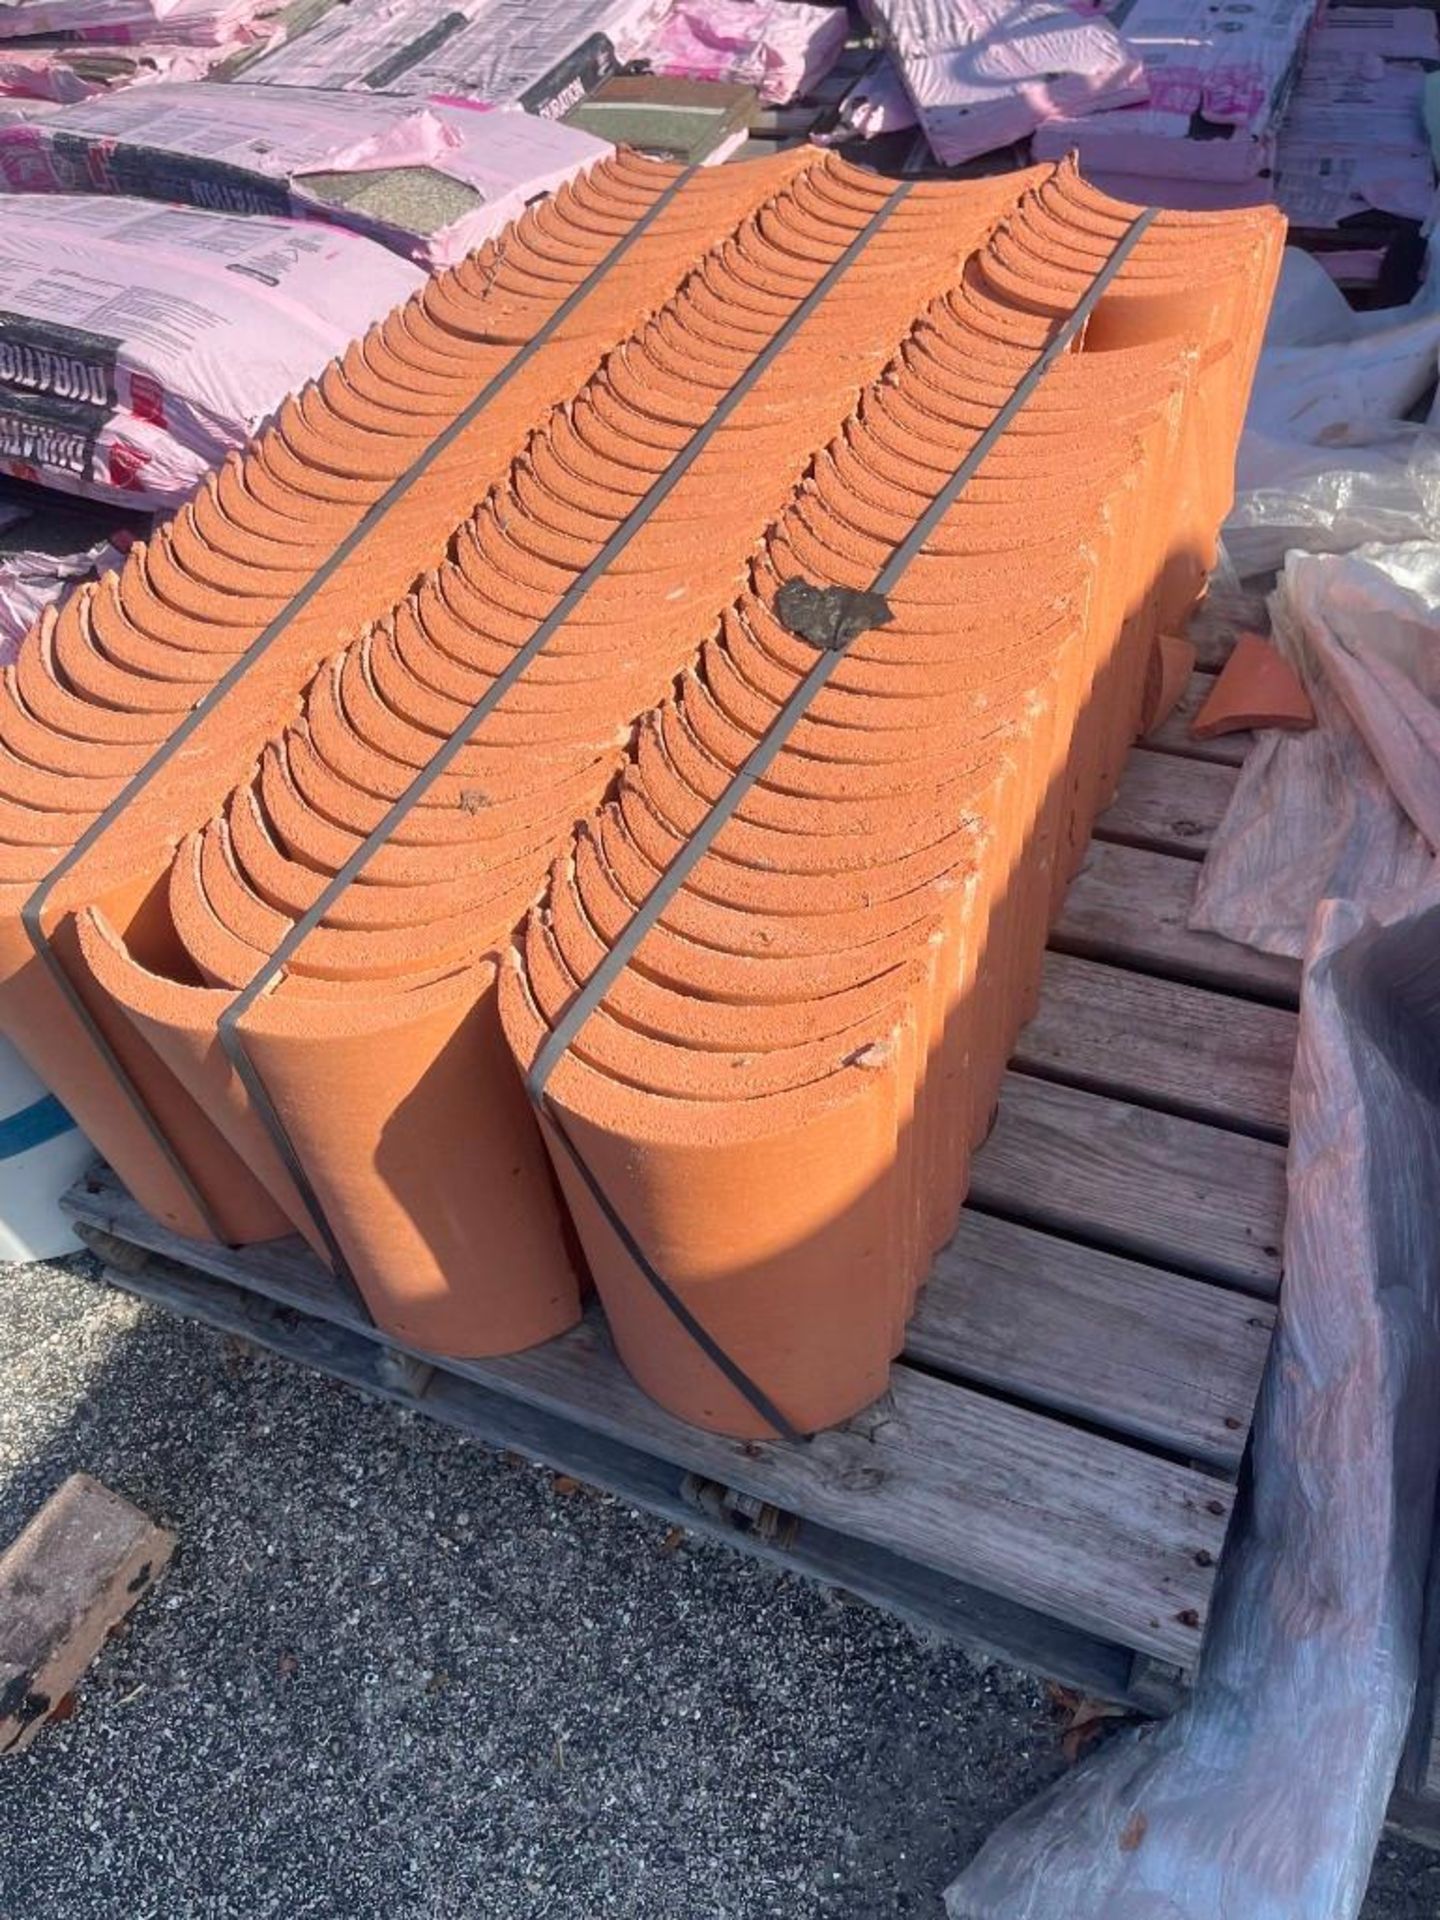 LOT: Assorted Roofing Tiles - Image 4 of 20